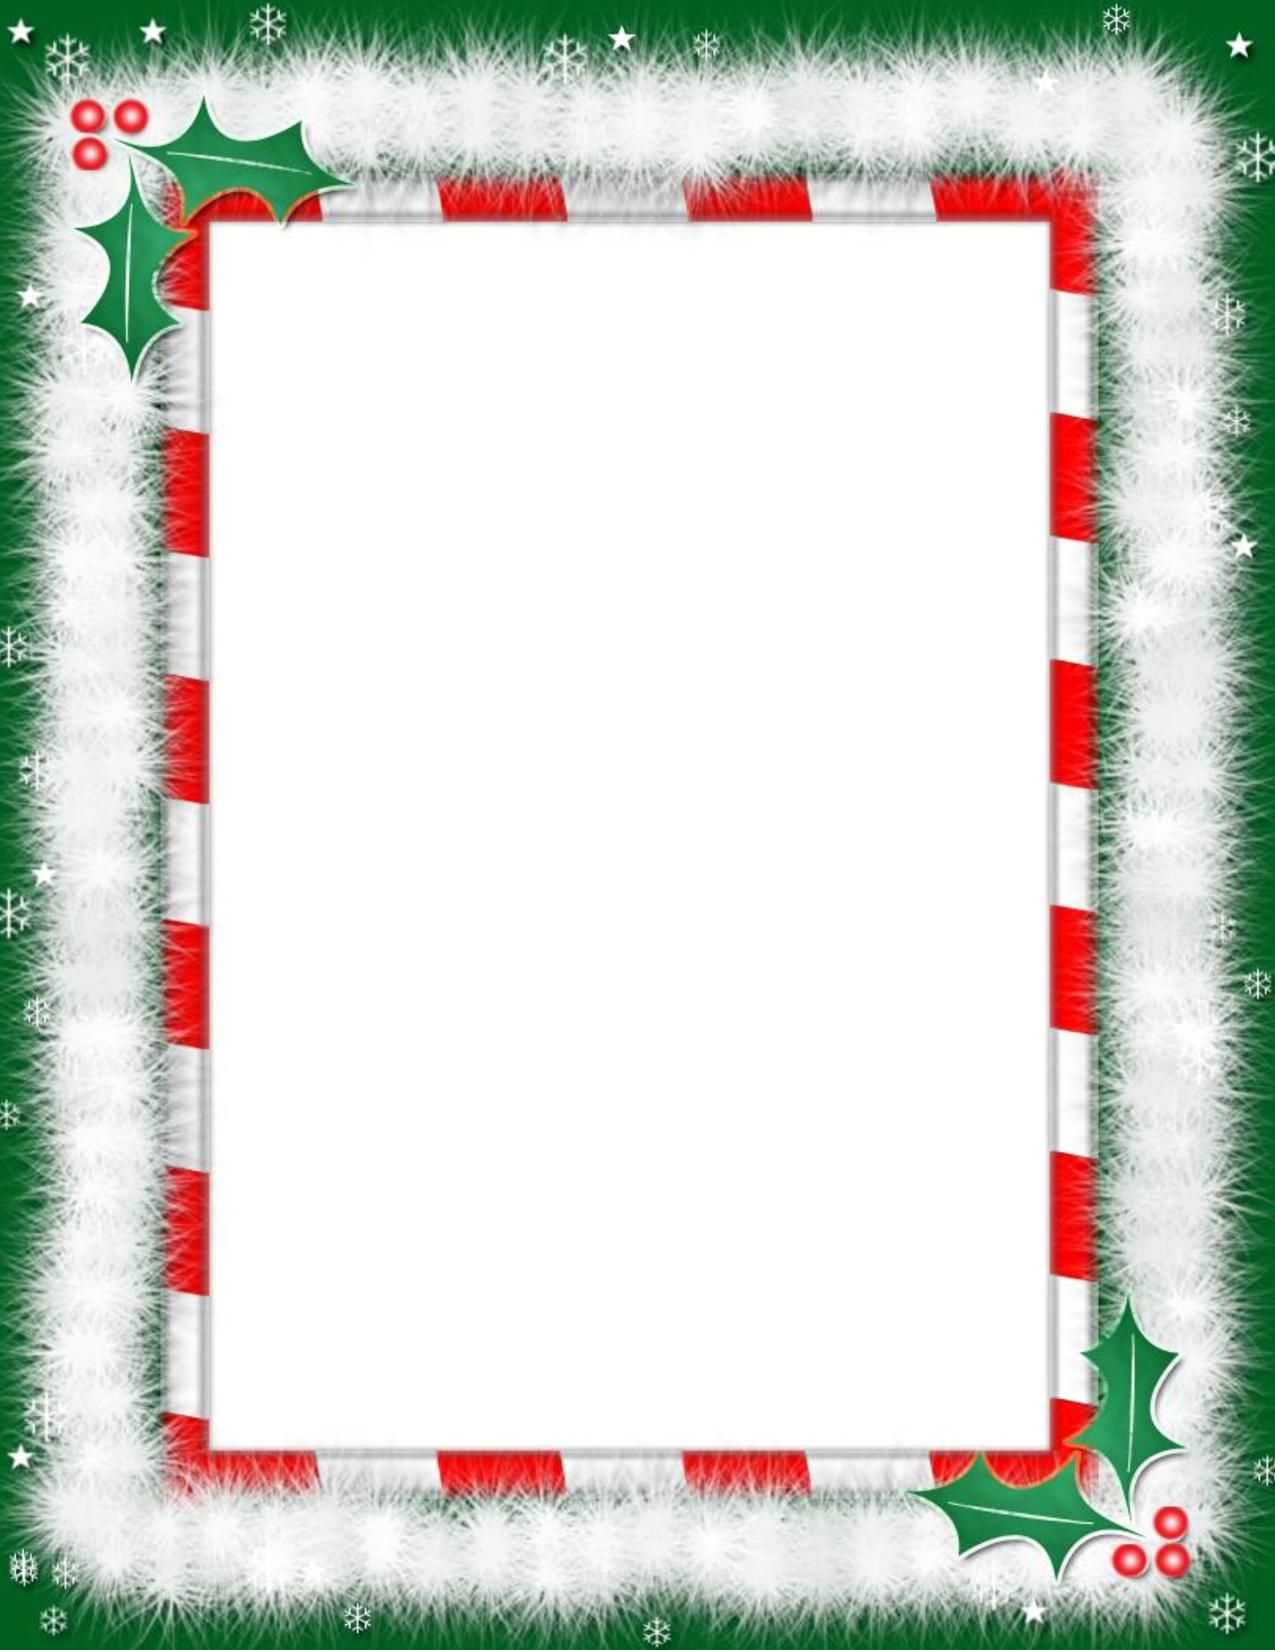 Heart Word Borders Templates Free |  Borders For Word With Christmas Border Word Template